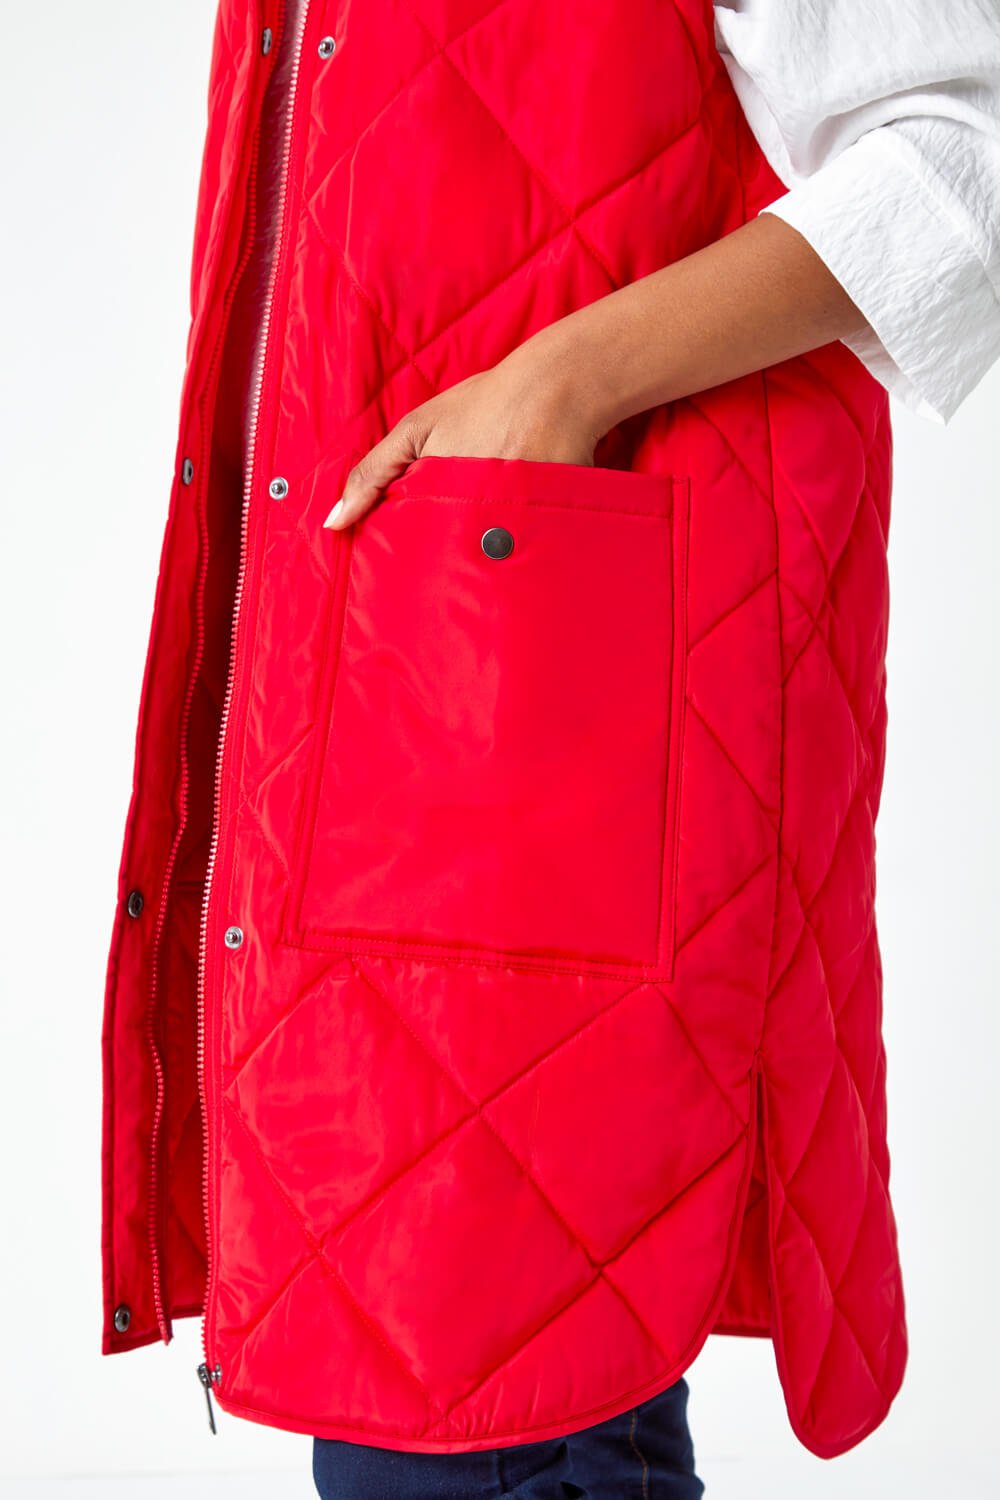 Red Diamond Quilted Longline Gilet, Image 6 of 7